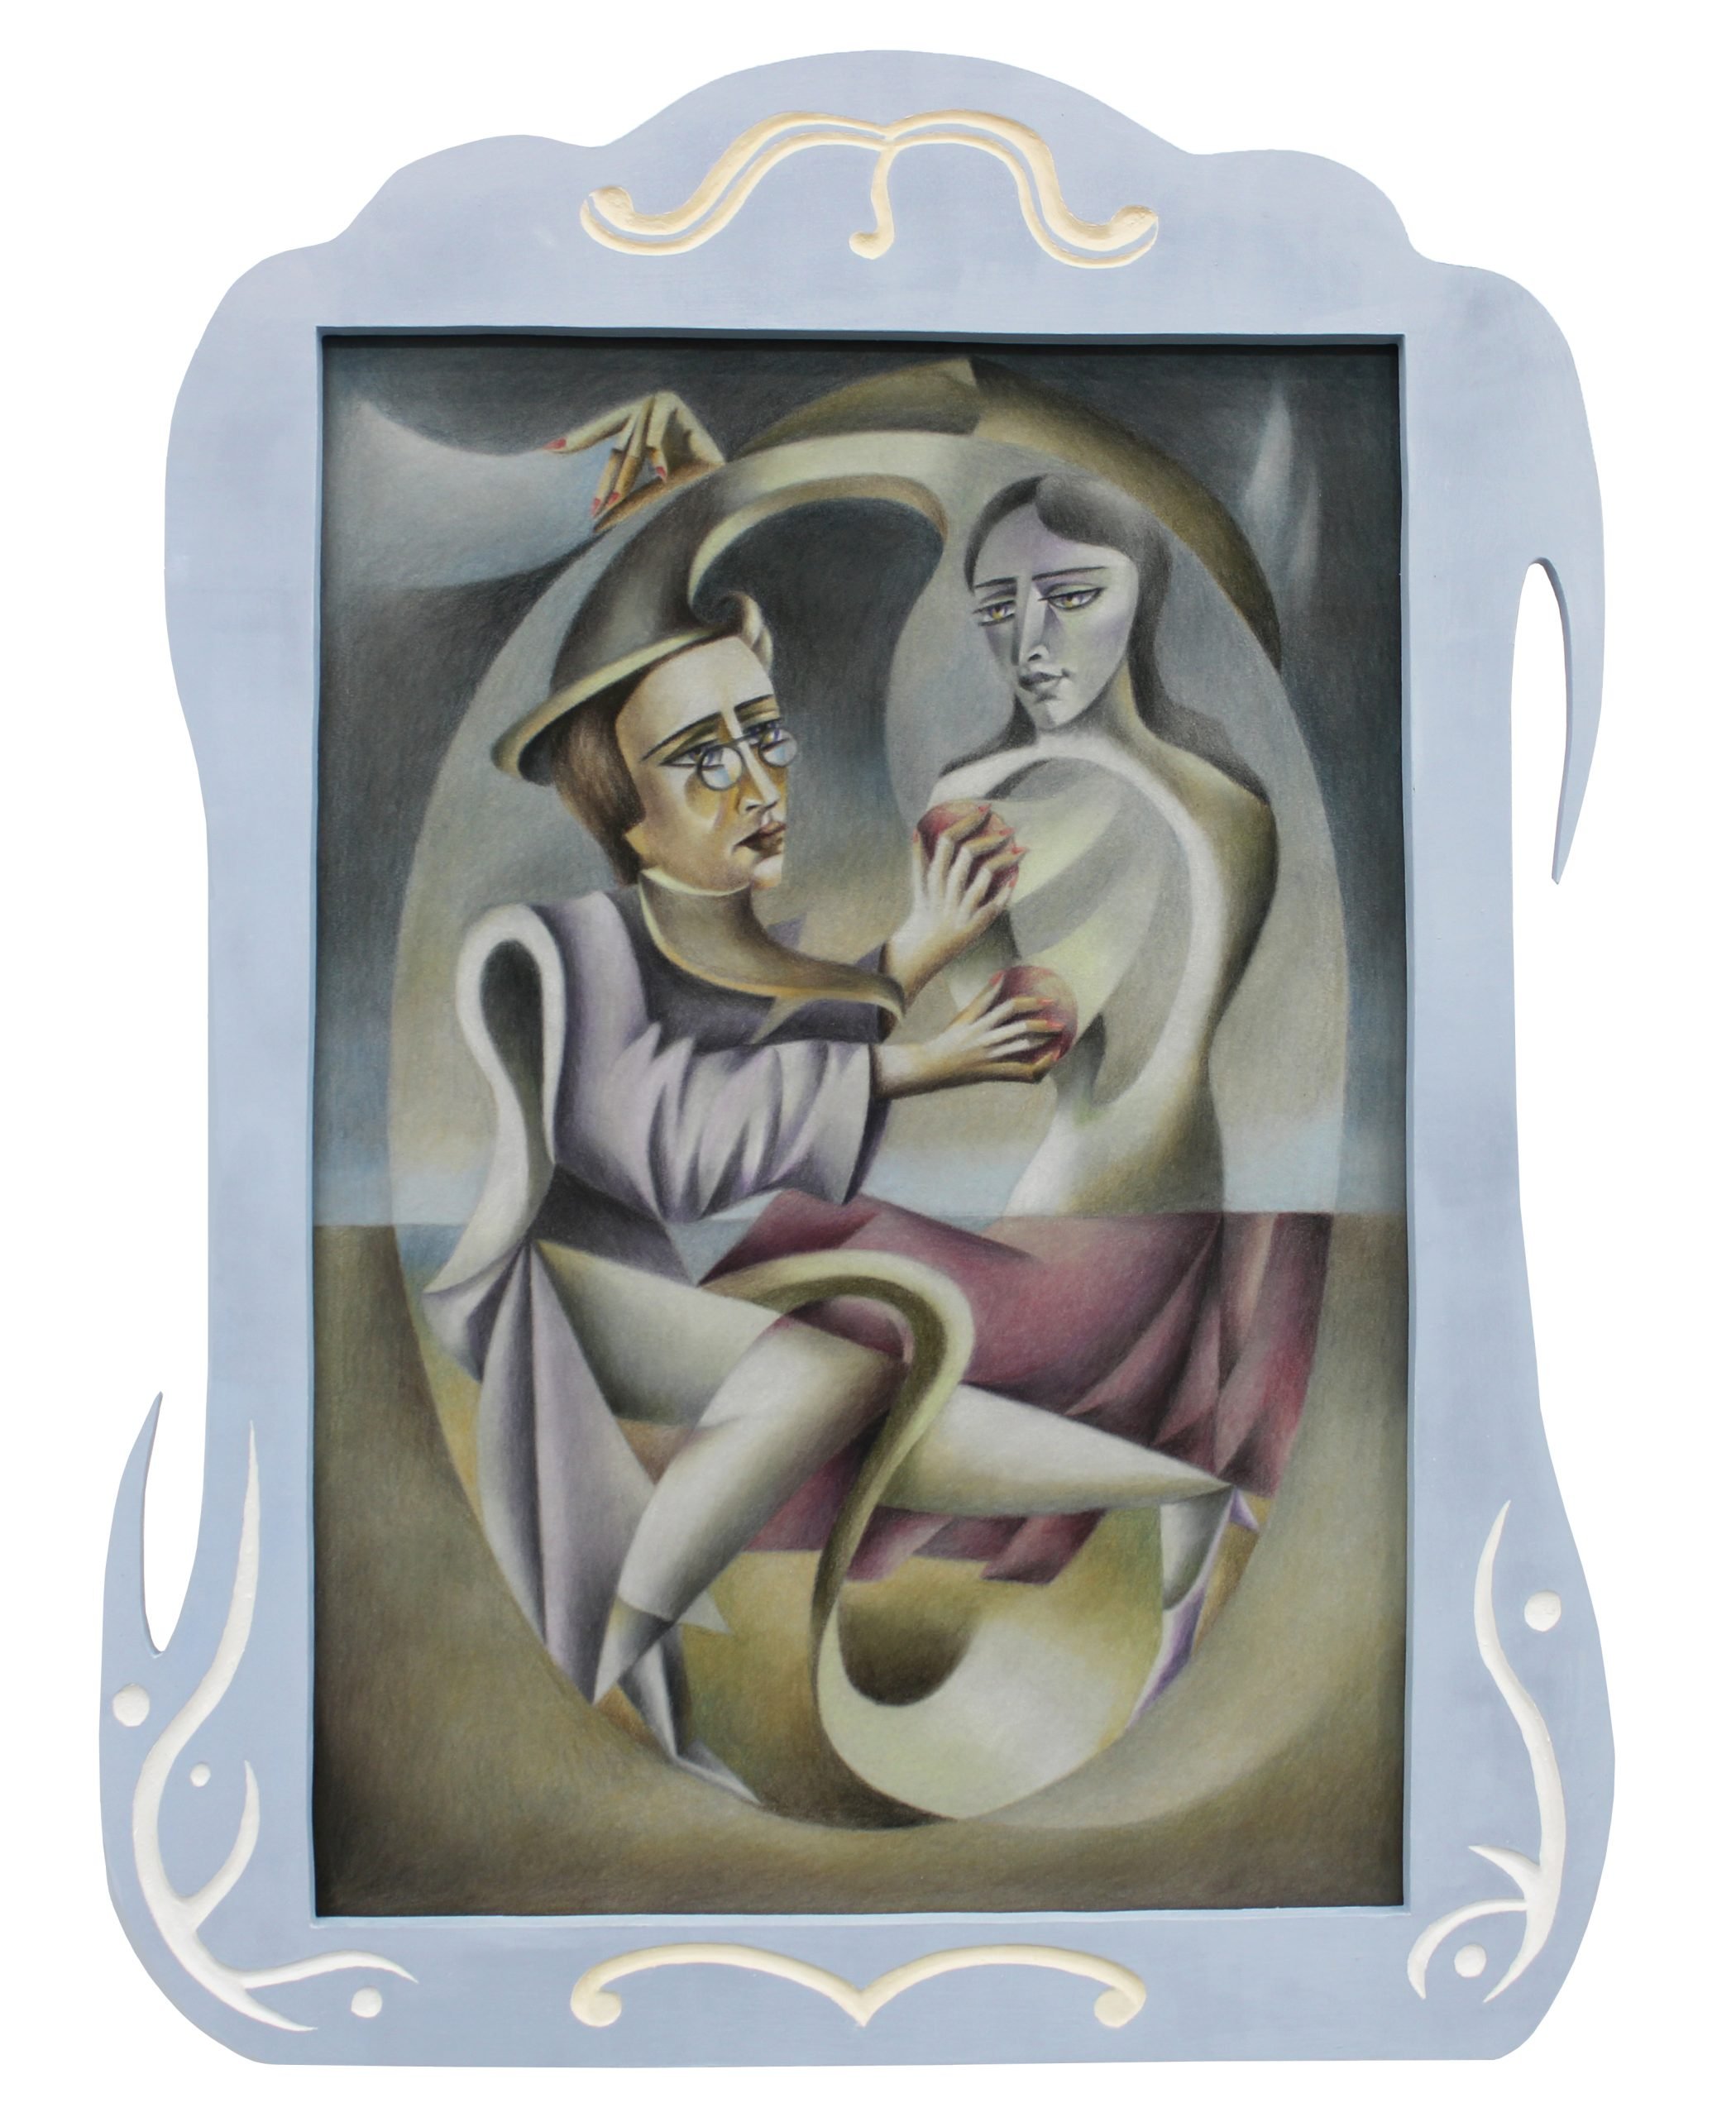 Jane Ching-yuk Ng, Magical Exchange, caran d’ache on 260gsm velour paper with artist-made engraved frame, 70 x 50 cm